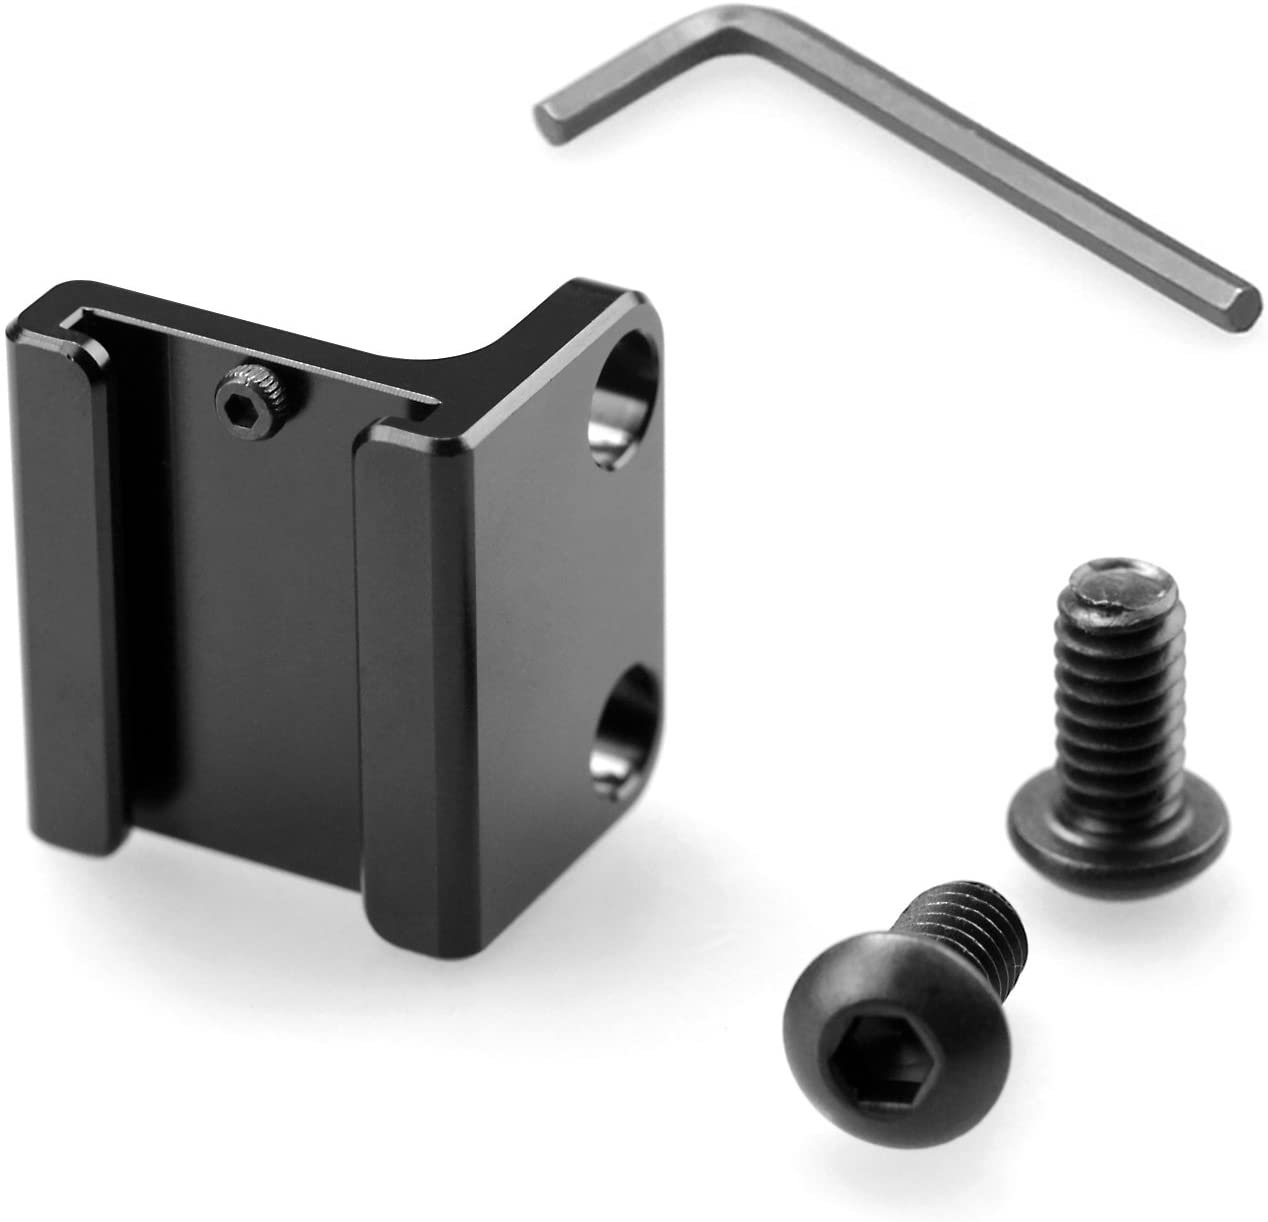 SmallRig Cold Shoe Mount Adapter for Camera Cage - Model 1593